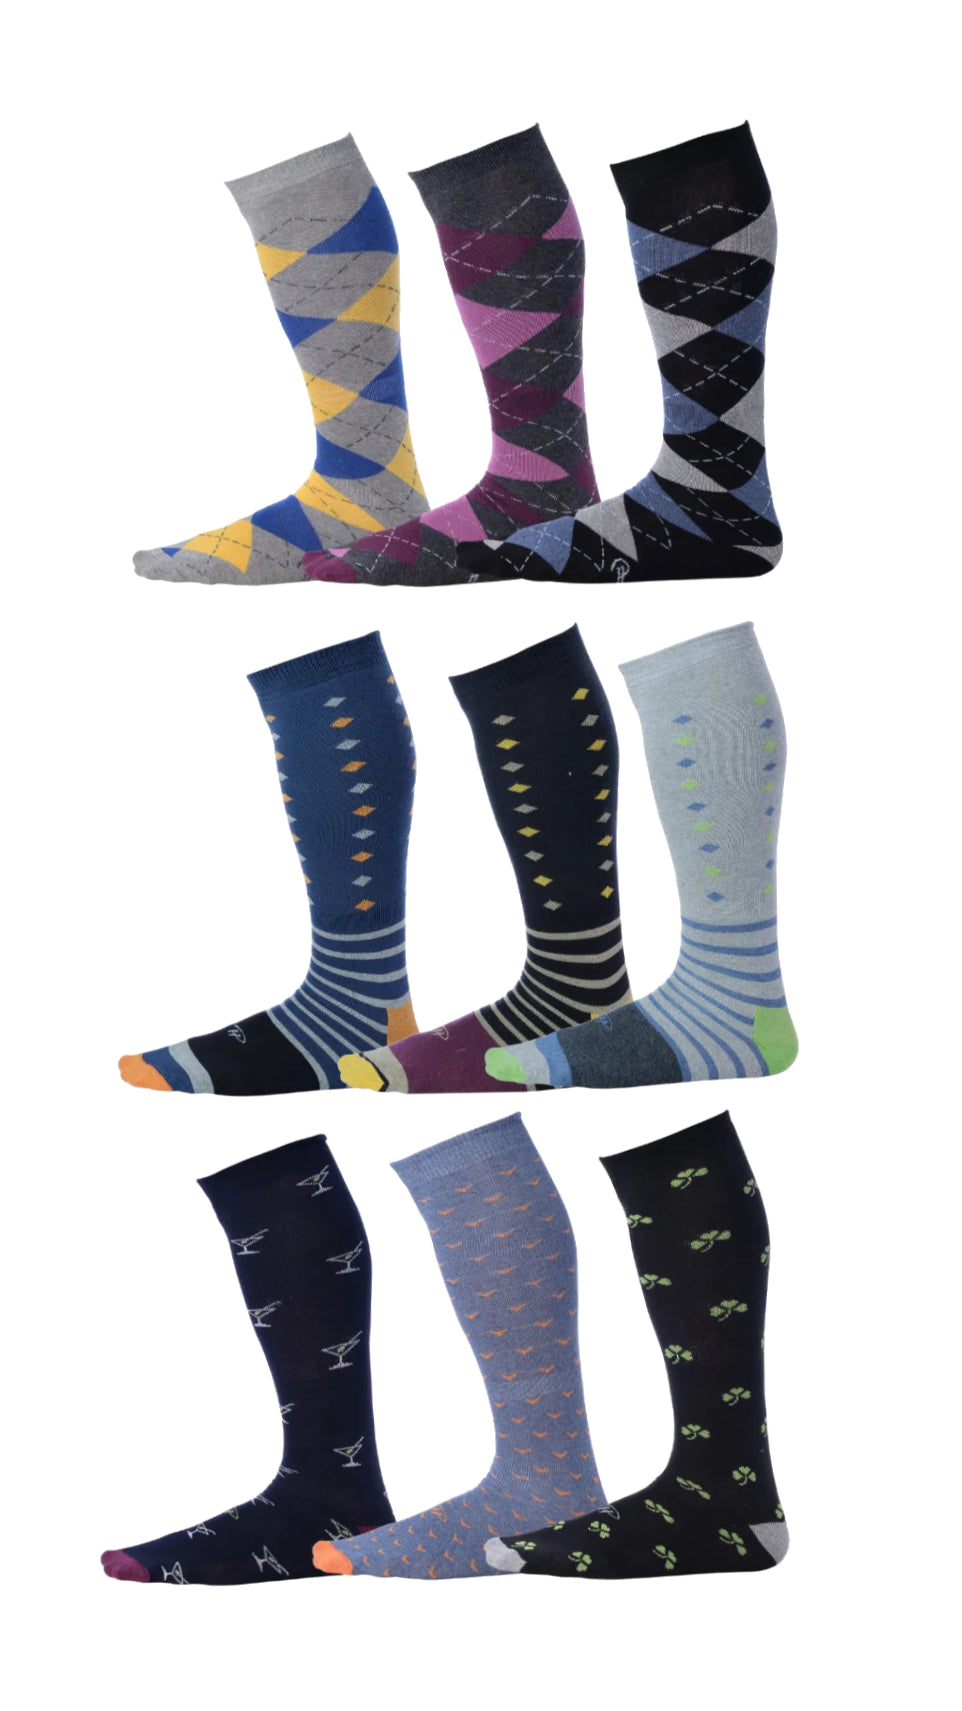 argyle striped and diamond pattern and fun pattern over the calf dress socks in light grey, navy blue, black, blue, and grey